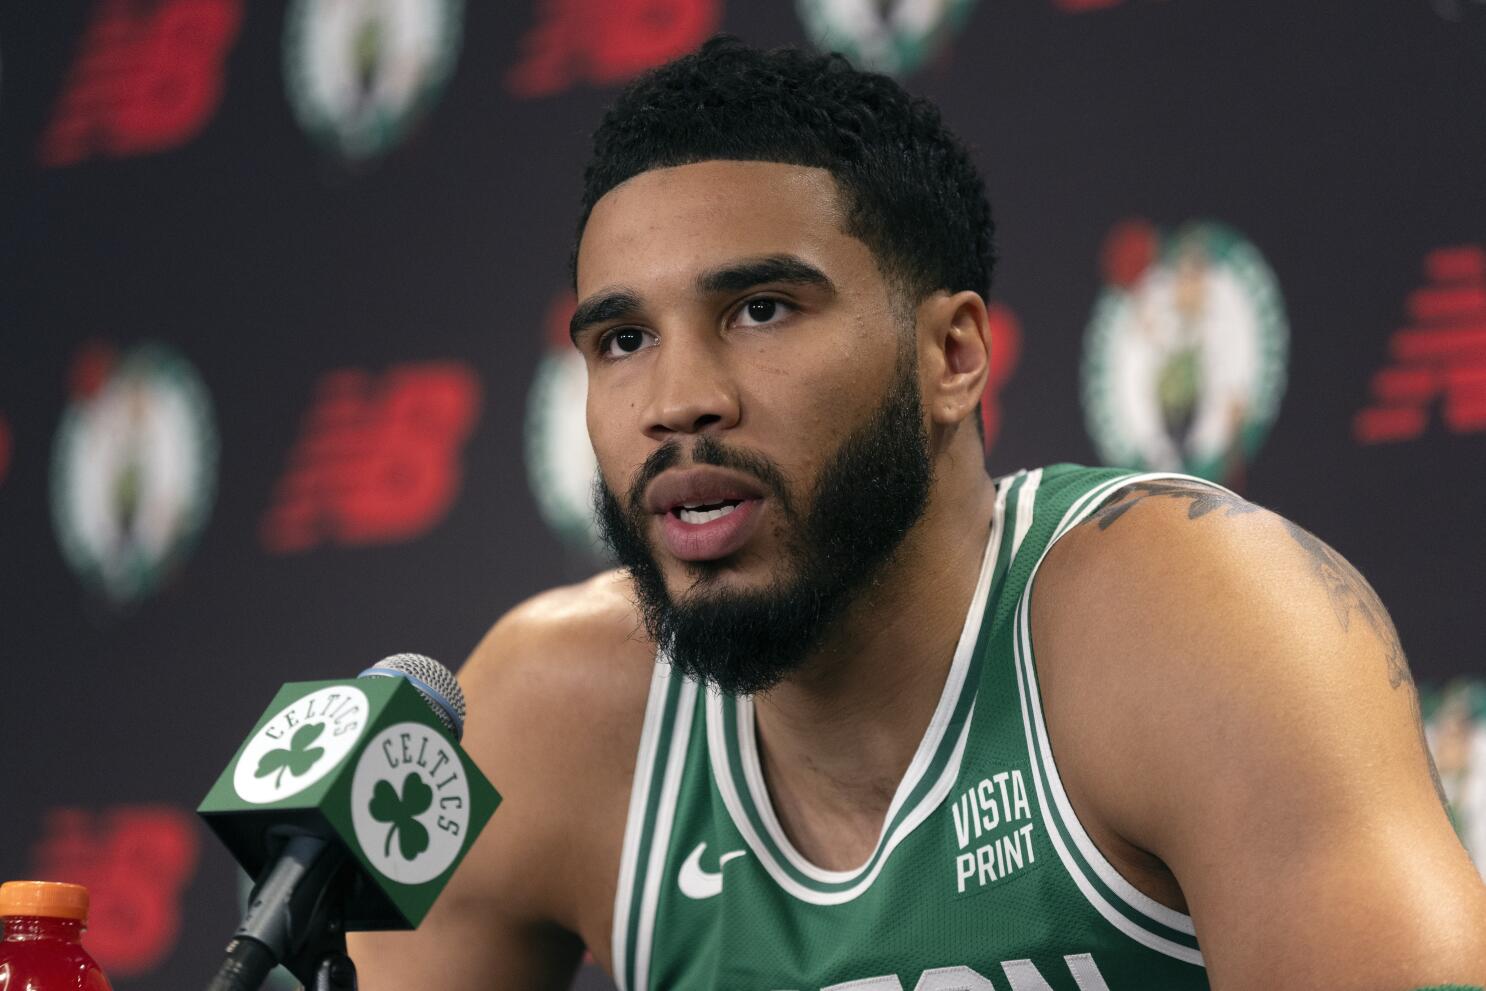 The Boston Celtics supermax extended Jaylen Brown over fear of